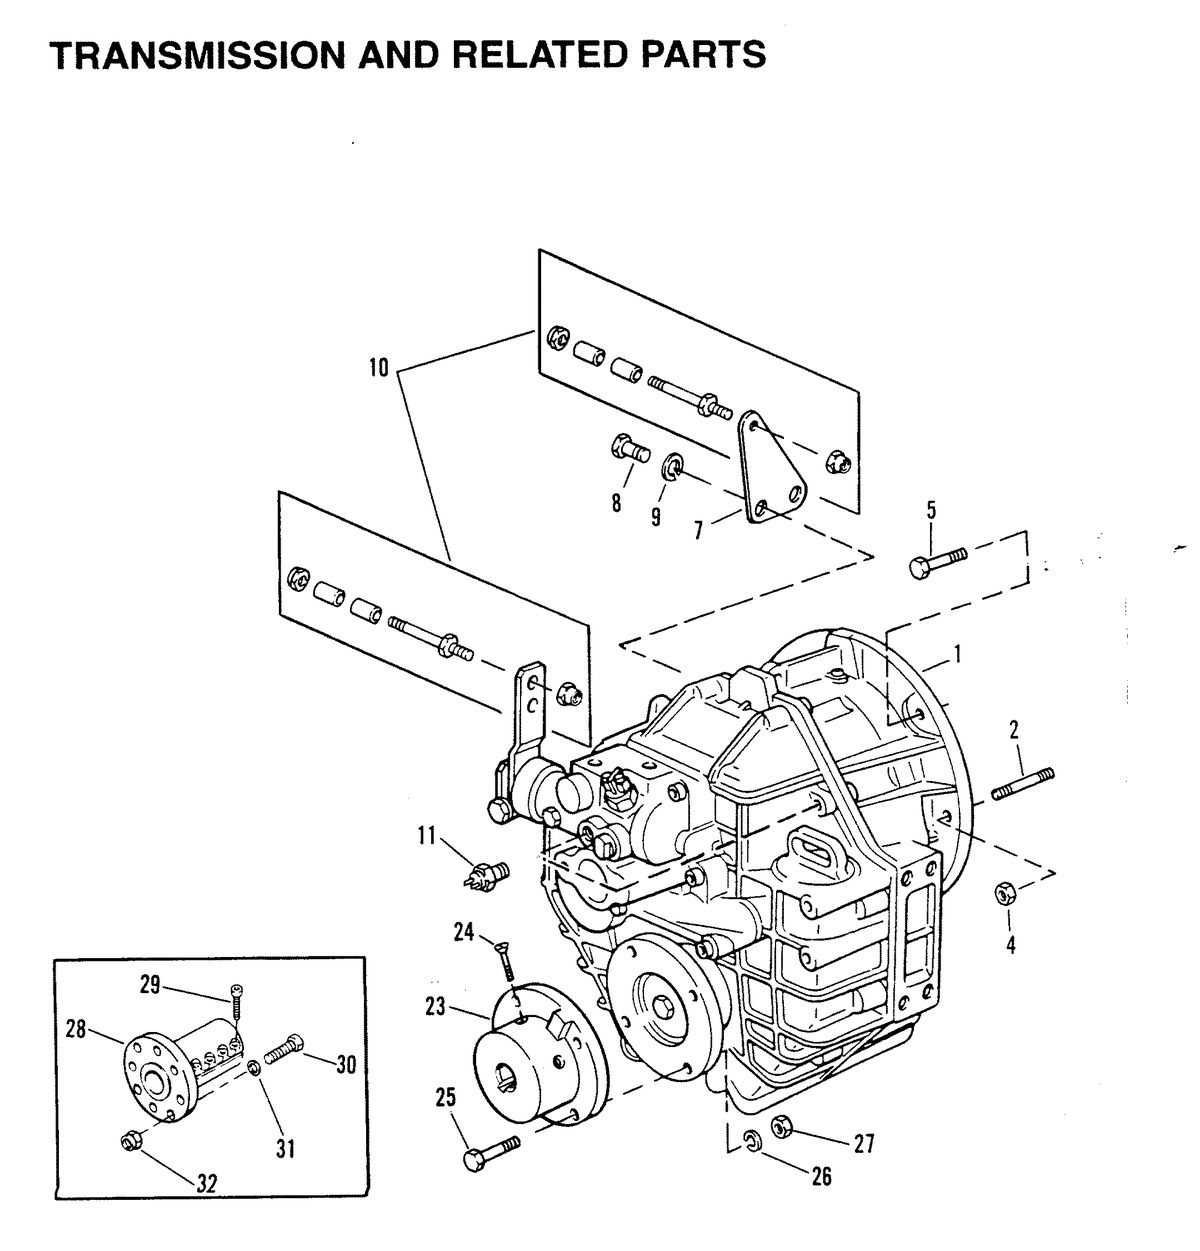 MERCRUISER D-254 TURBO ACDIESEL ENGINE STERN DRIVE/INBOARD TRANSMISSION AND RELATED PARTS (INBOARD)